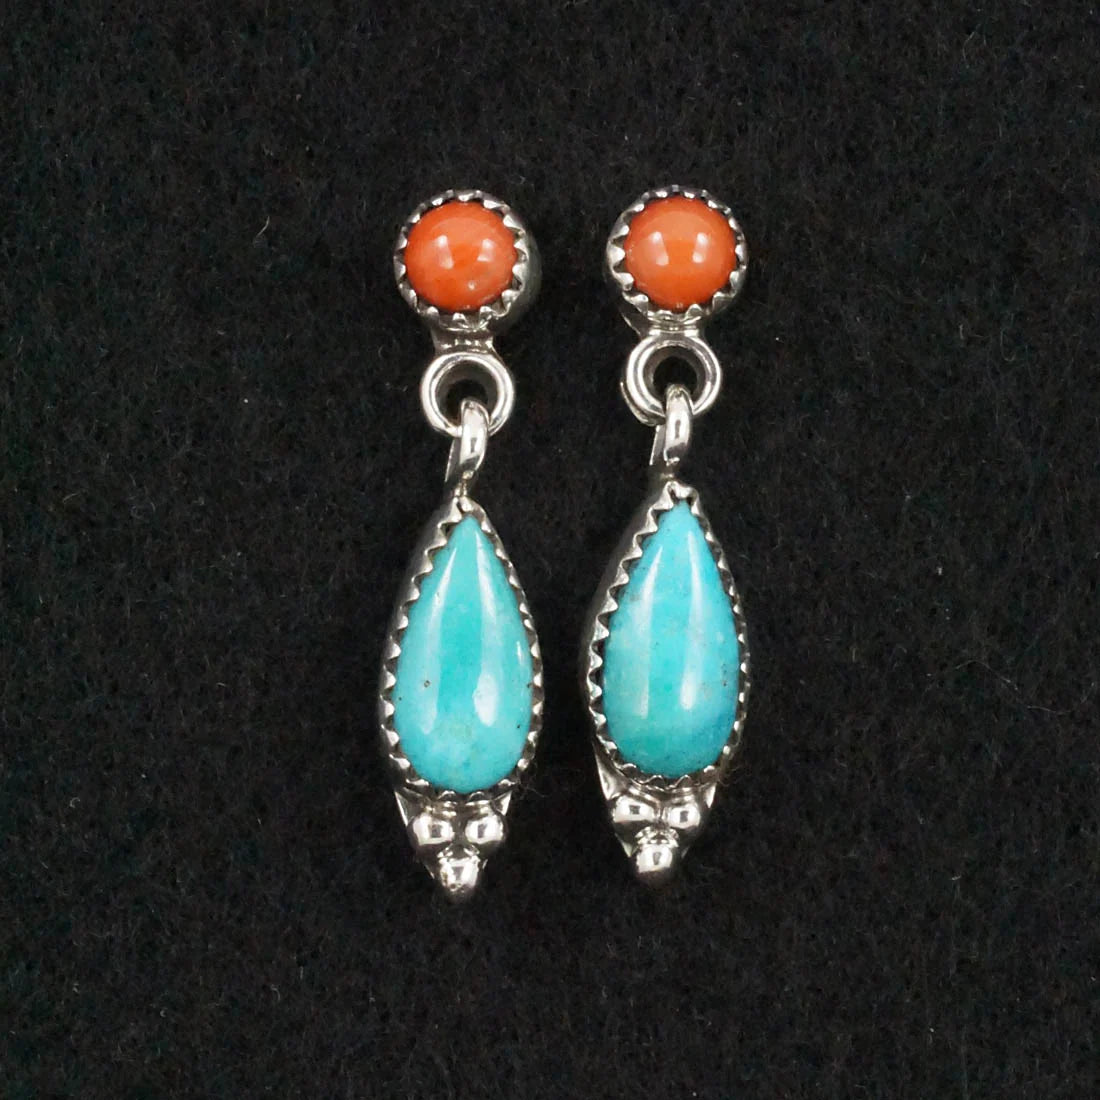 Turquoise & Coral Dangle Earrings